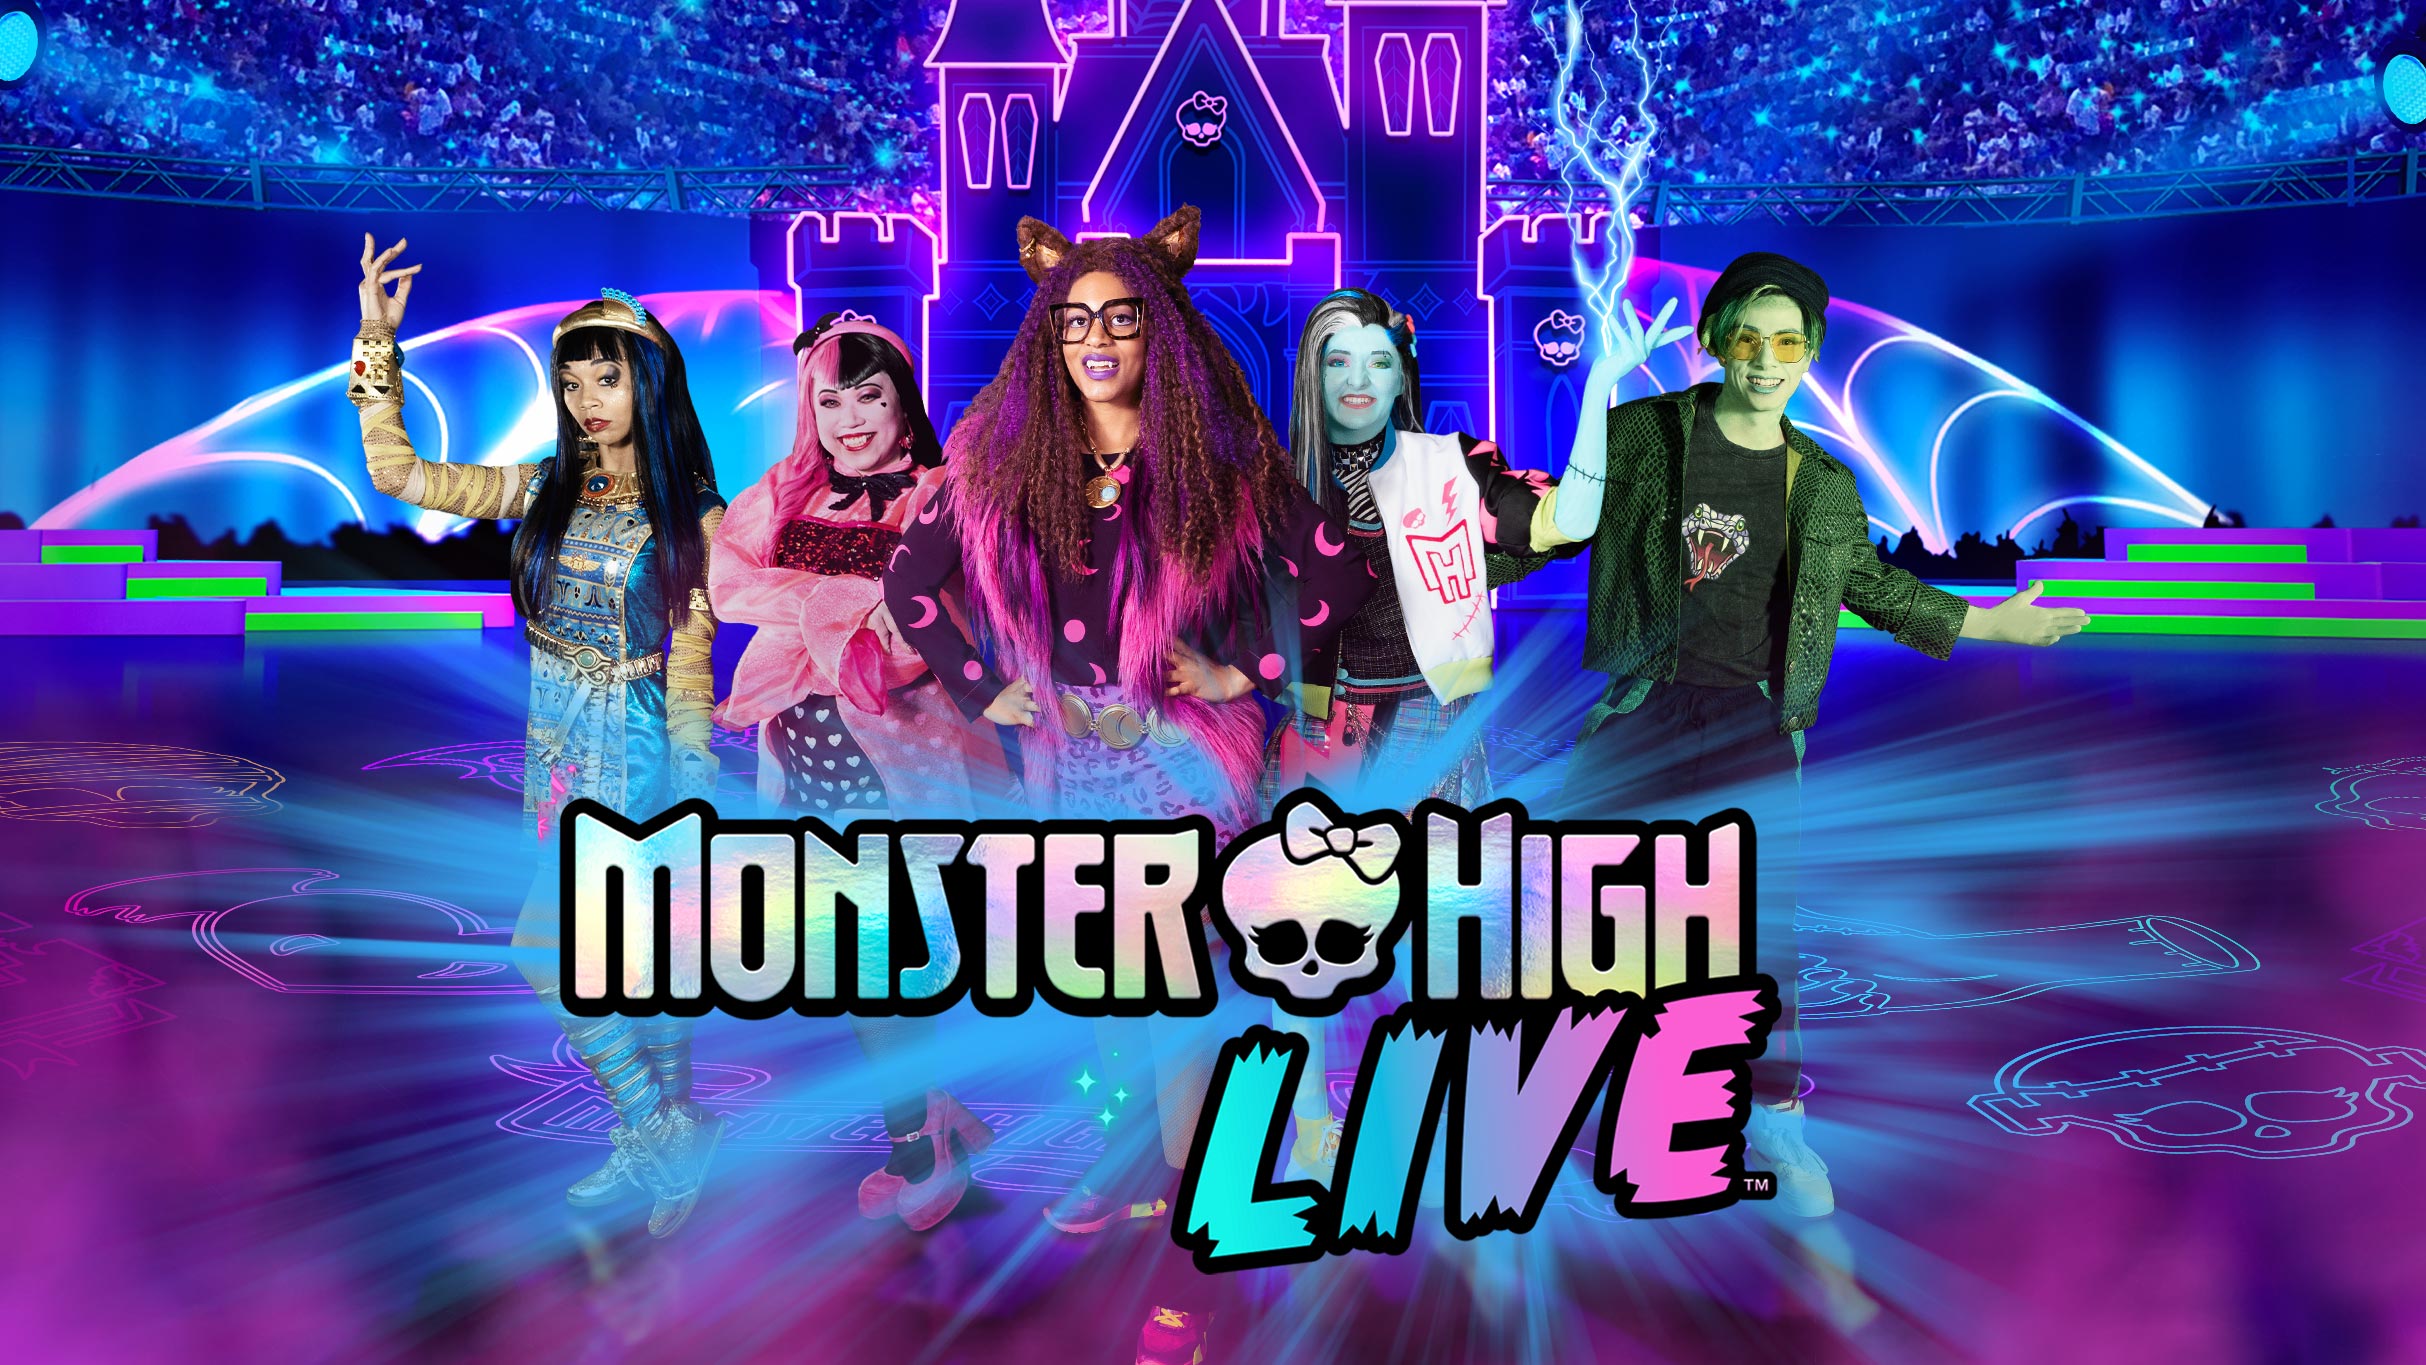 Monster High Live in Fairfax promo photo for Official Platinum Onsale presale offer code